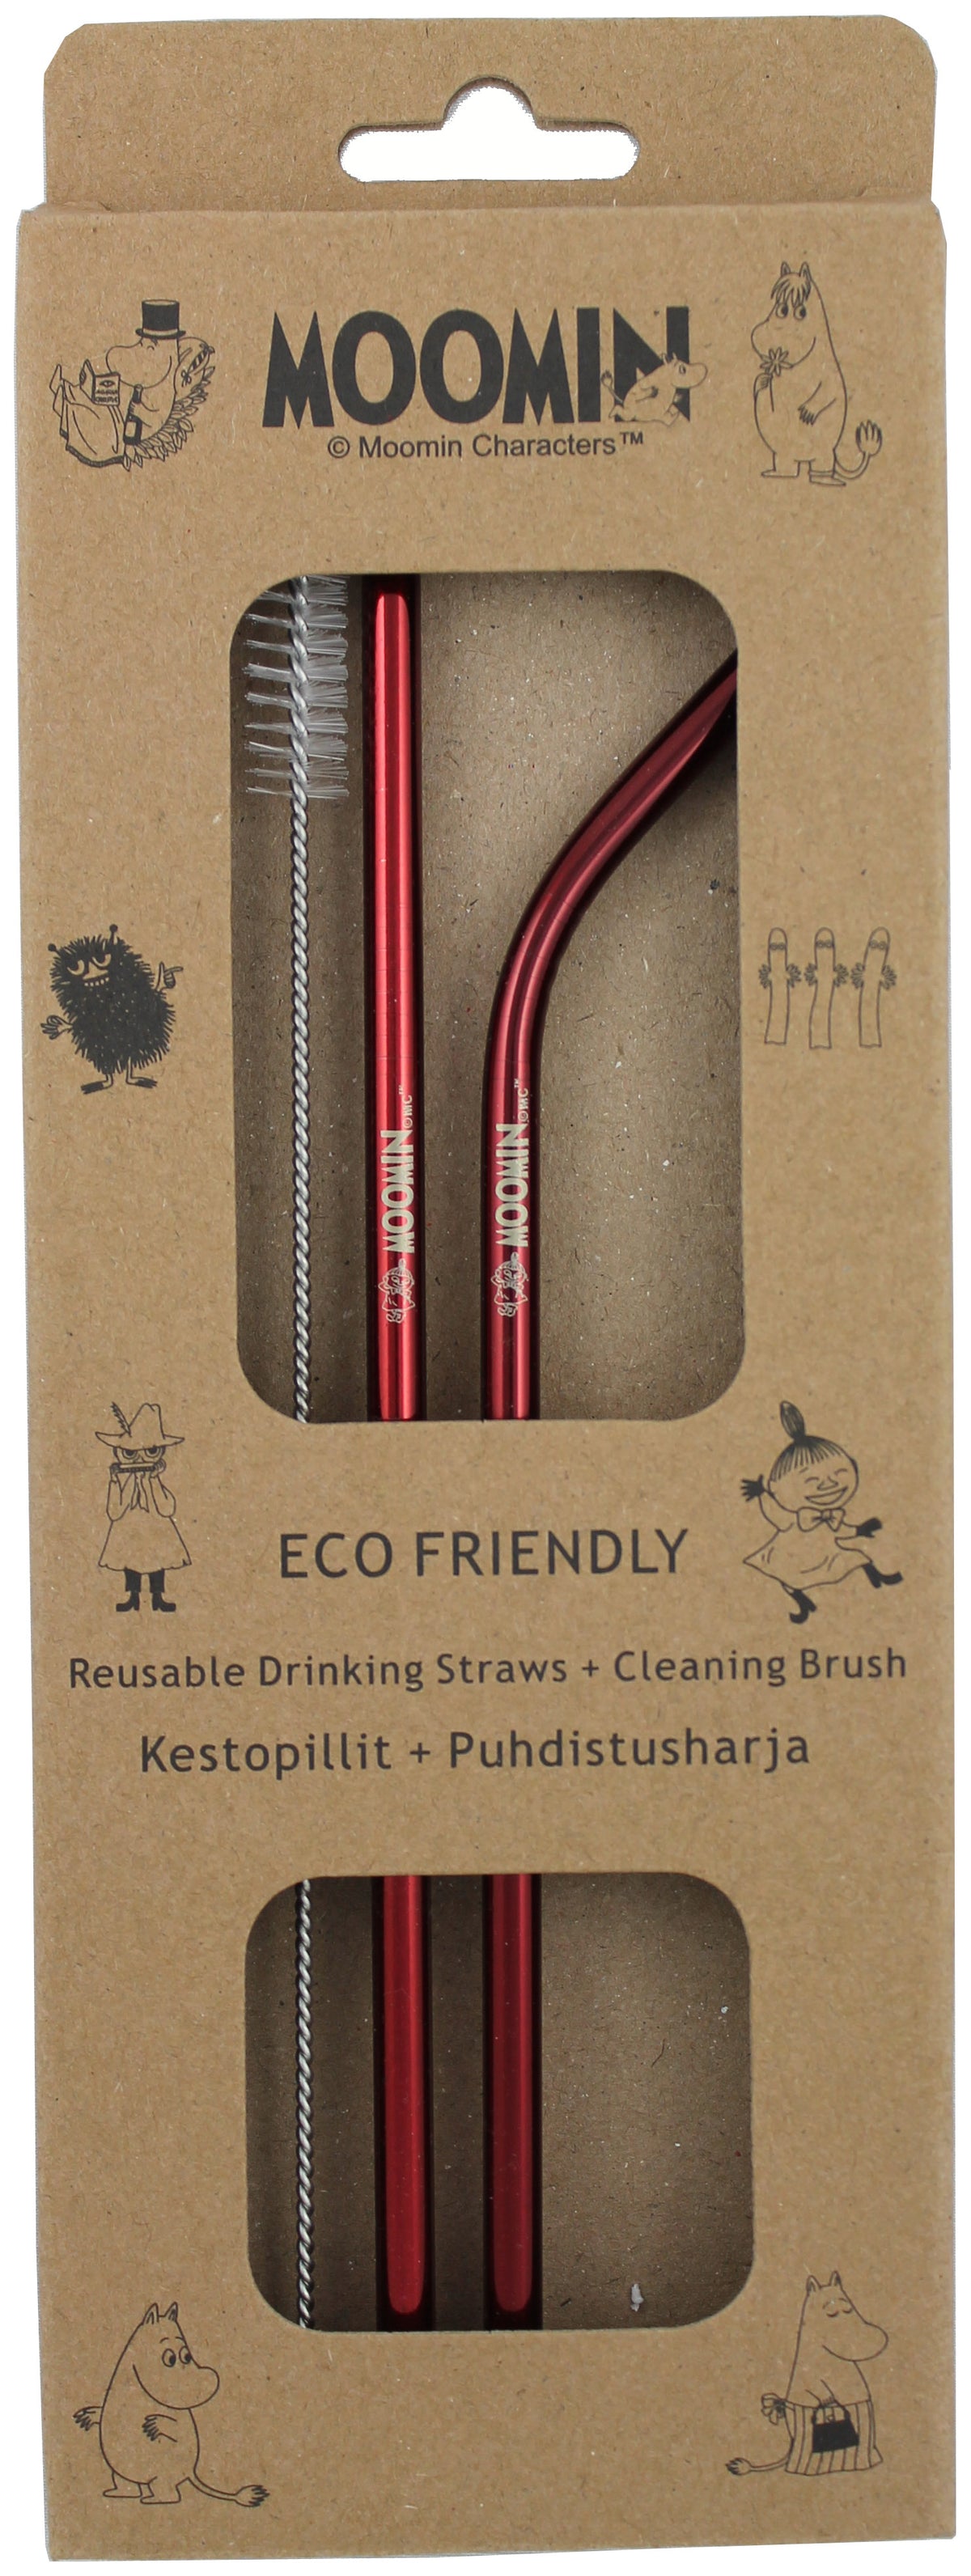 Reusable Drinking Straws Red